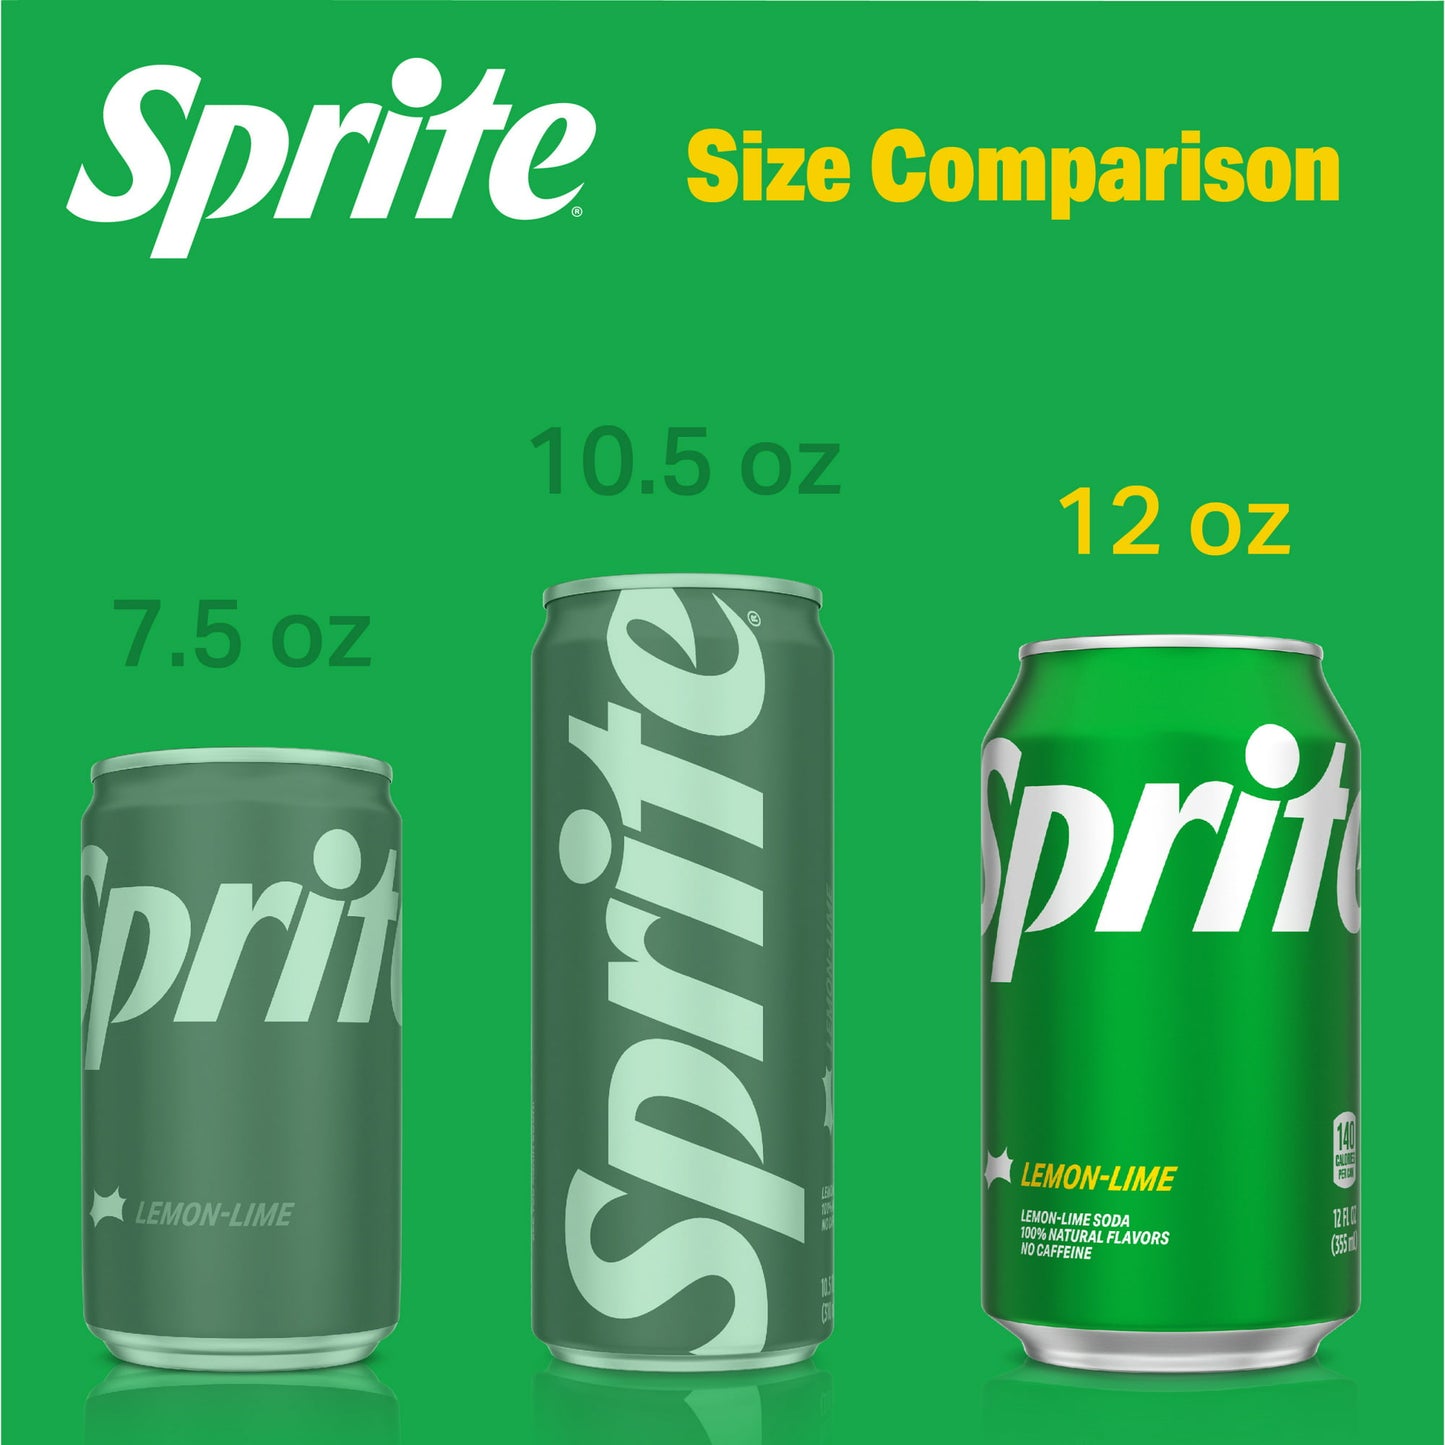 Sprite 12 Oz, Case Of 24 Cans